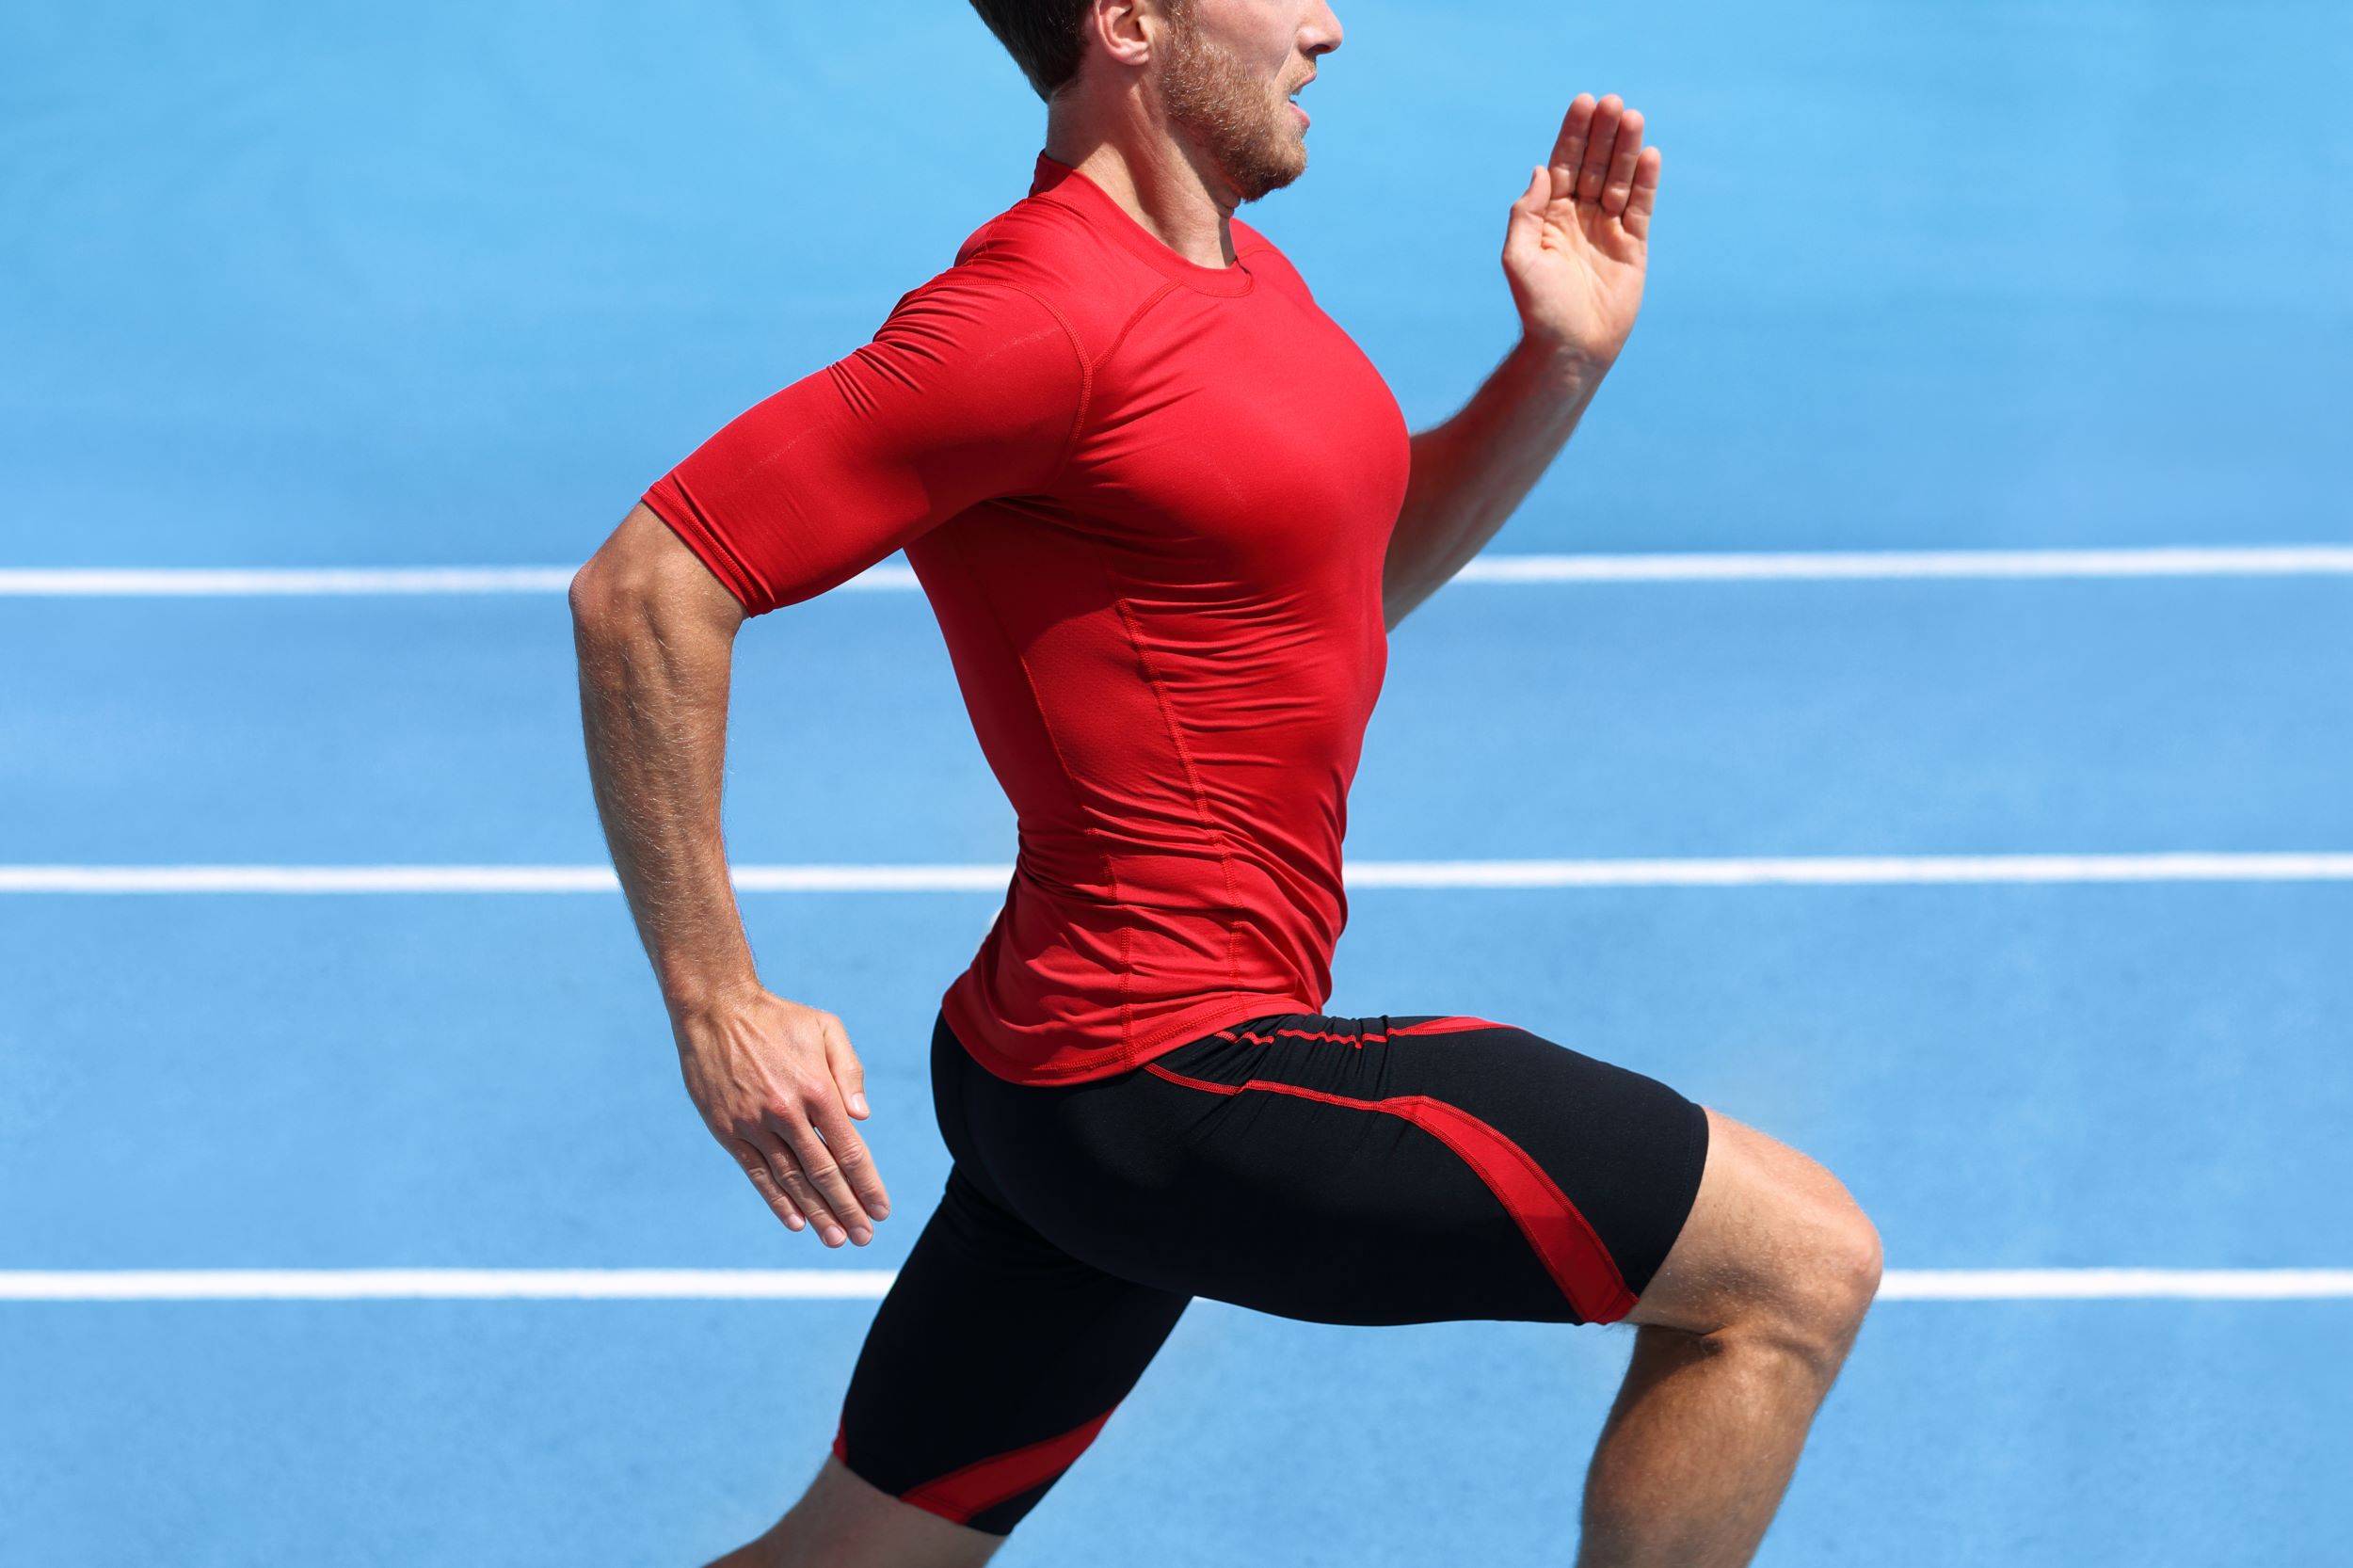 A man running on track in compression clothing